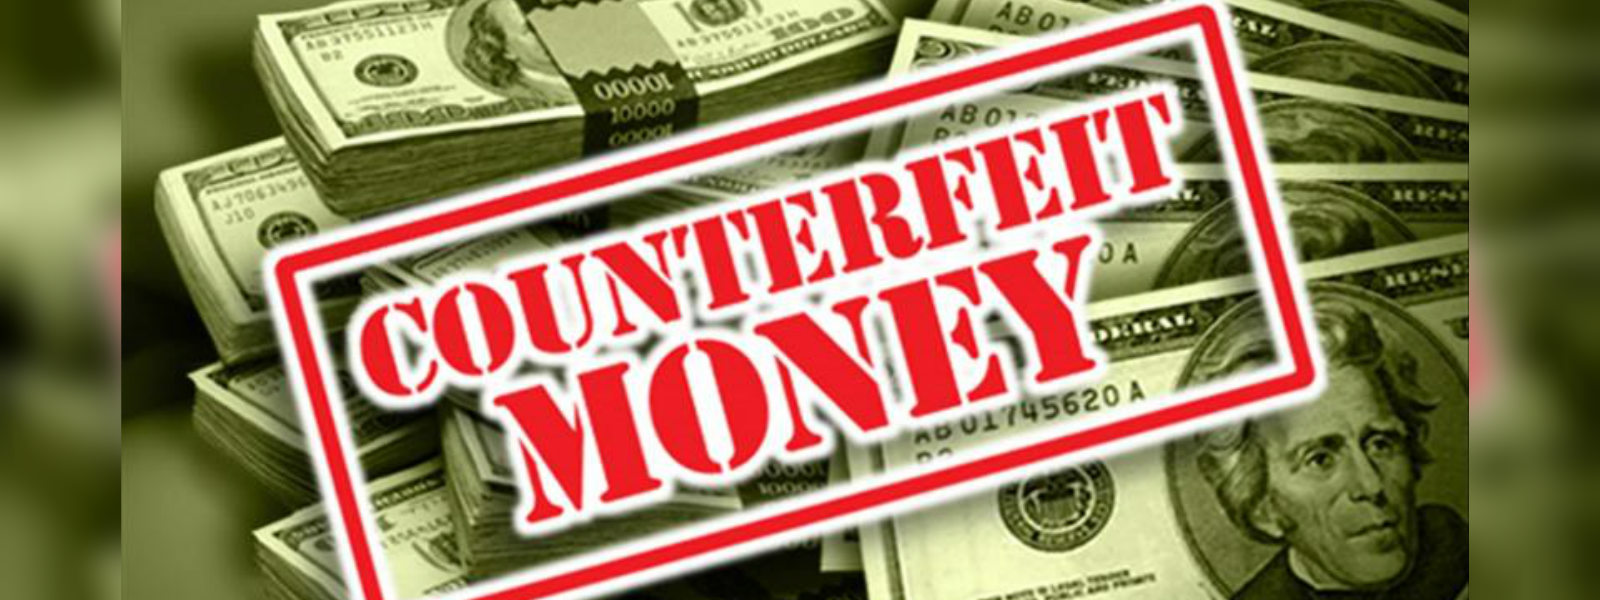 Man arrested with counterfeit notes